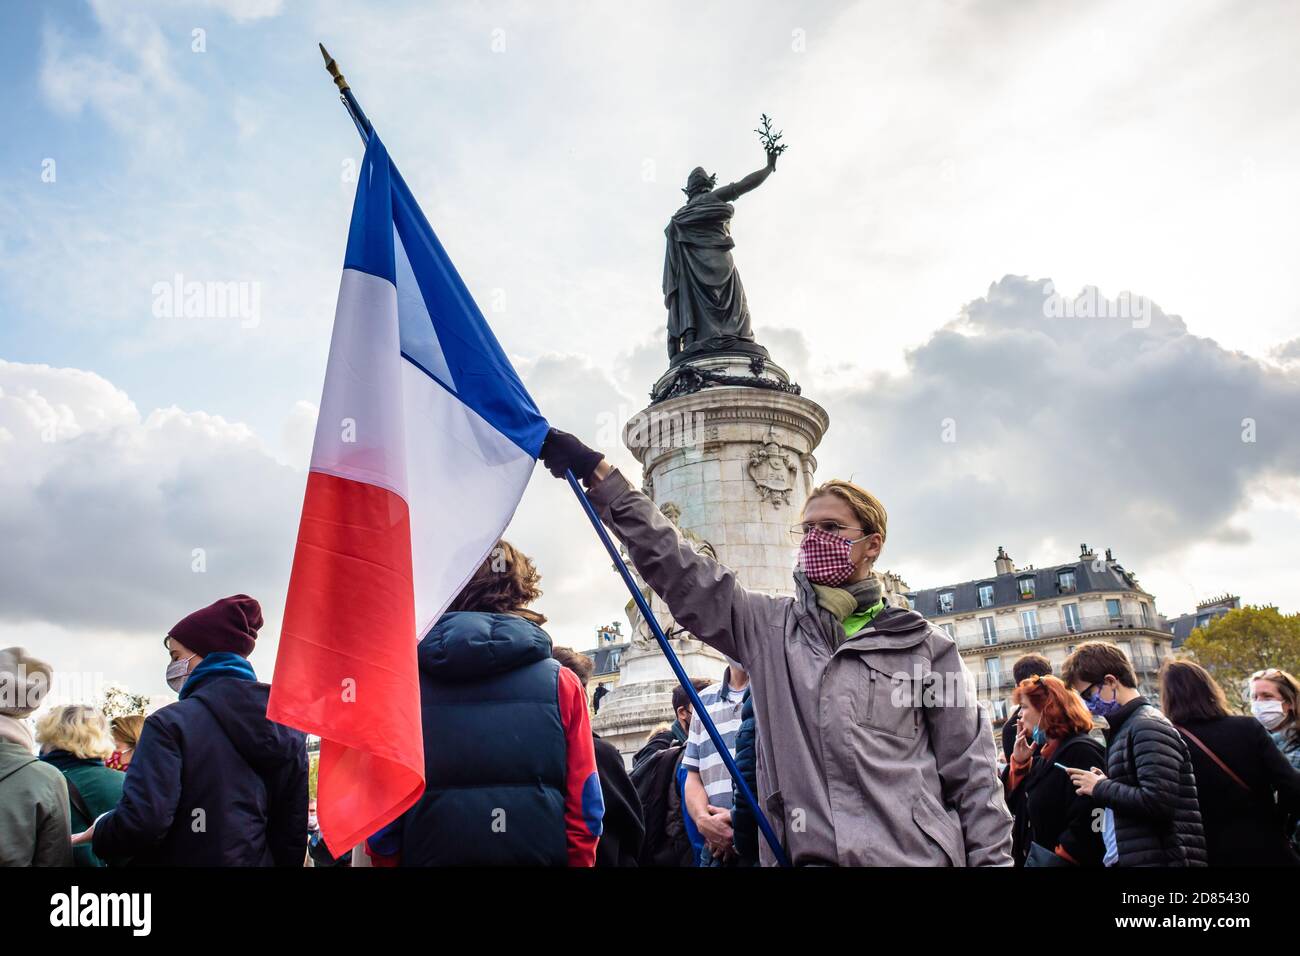 A man wearing a face mask is holding a French flag at the foot of the Monument to the Republic during a demonstration in Paris, France. Stock Photo